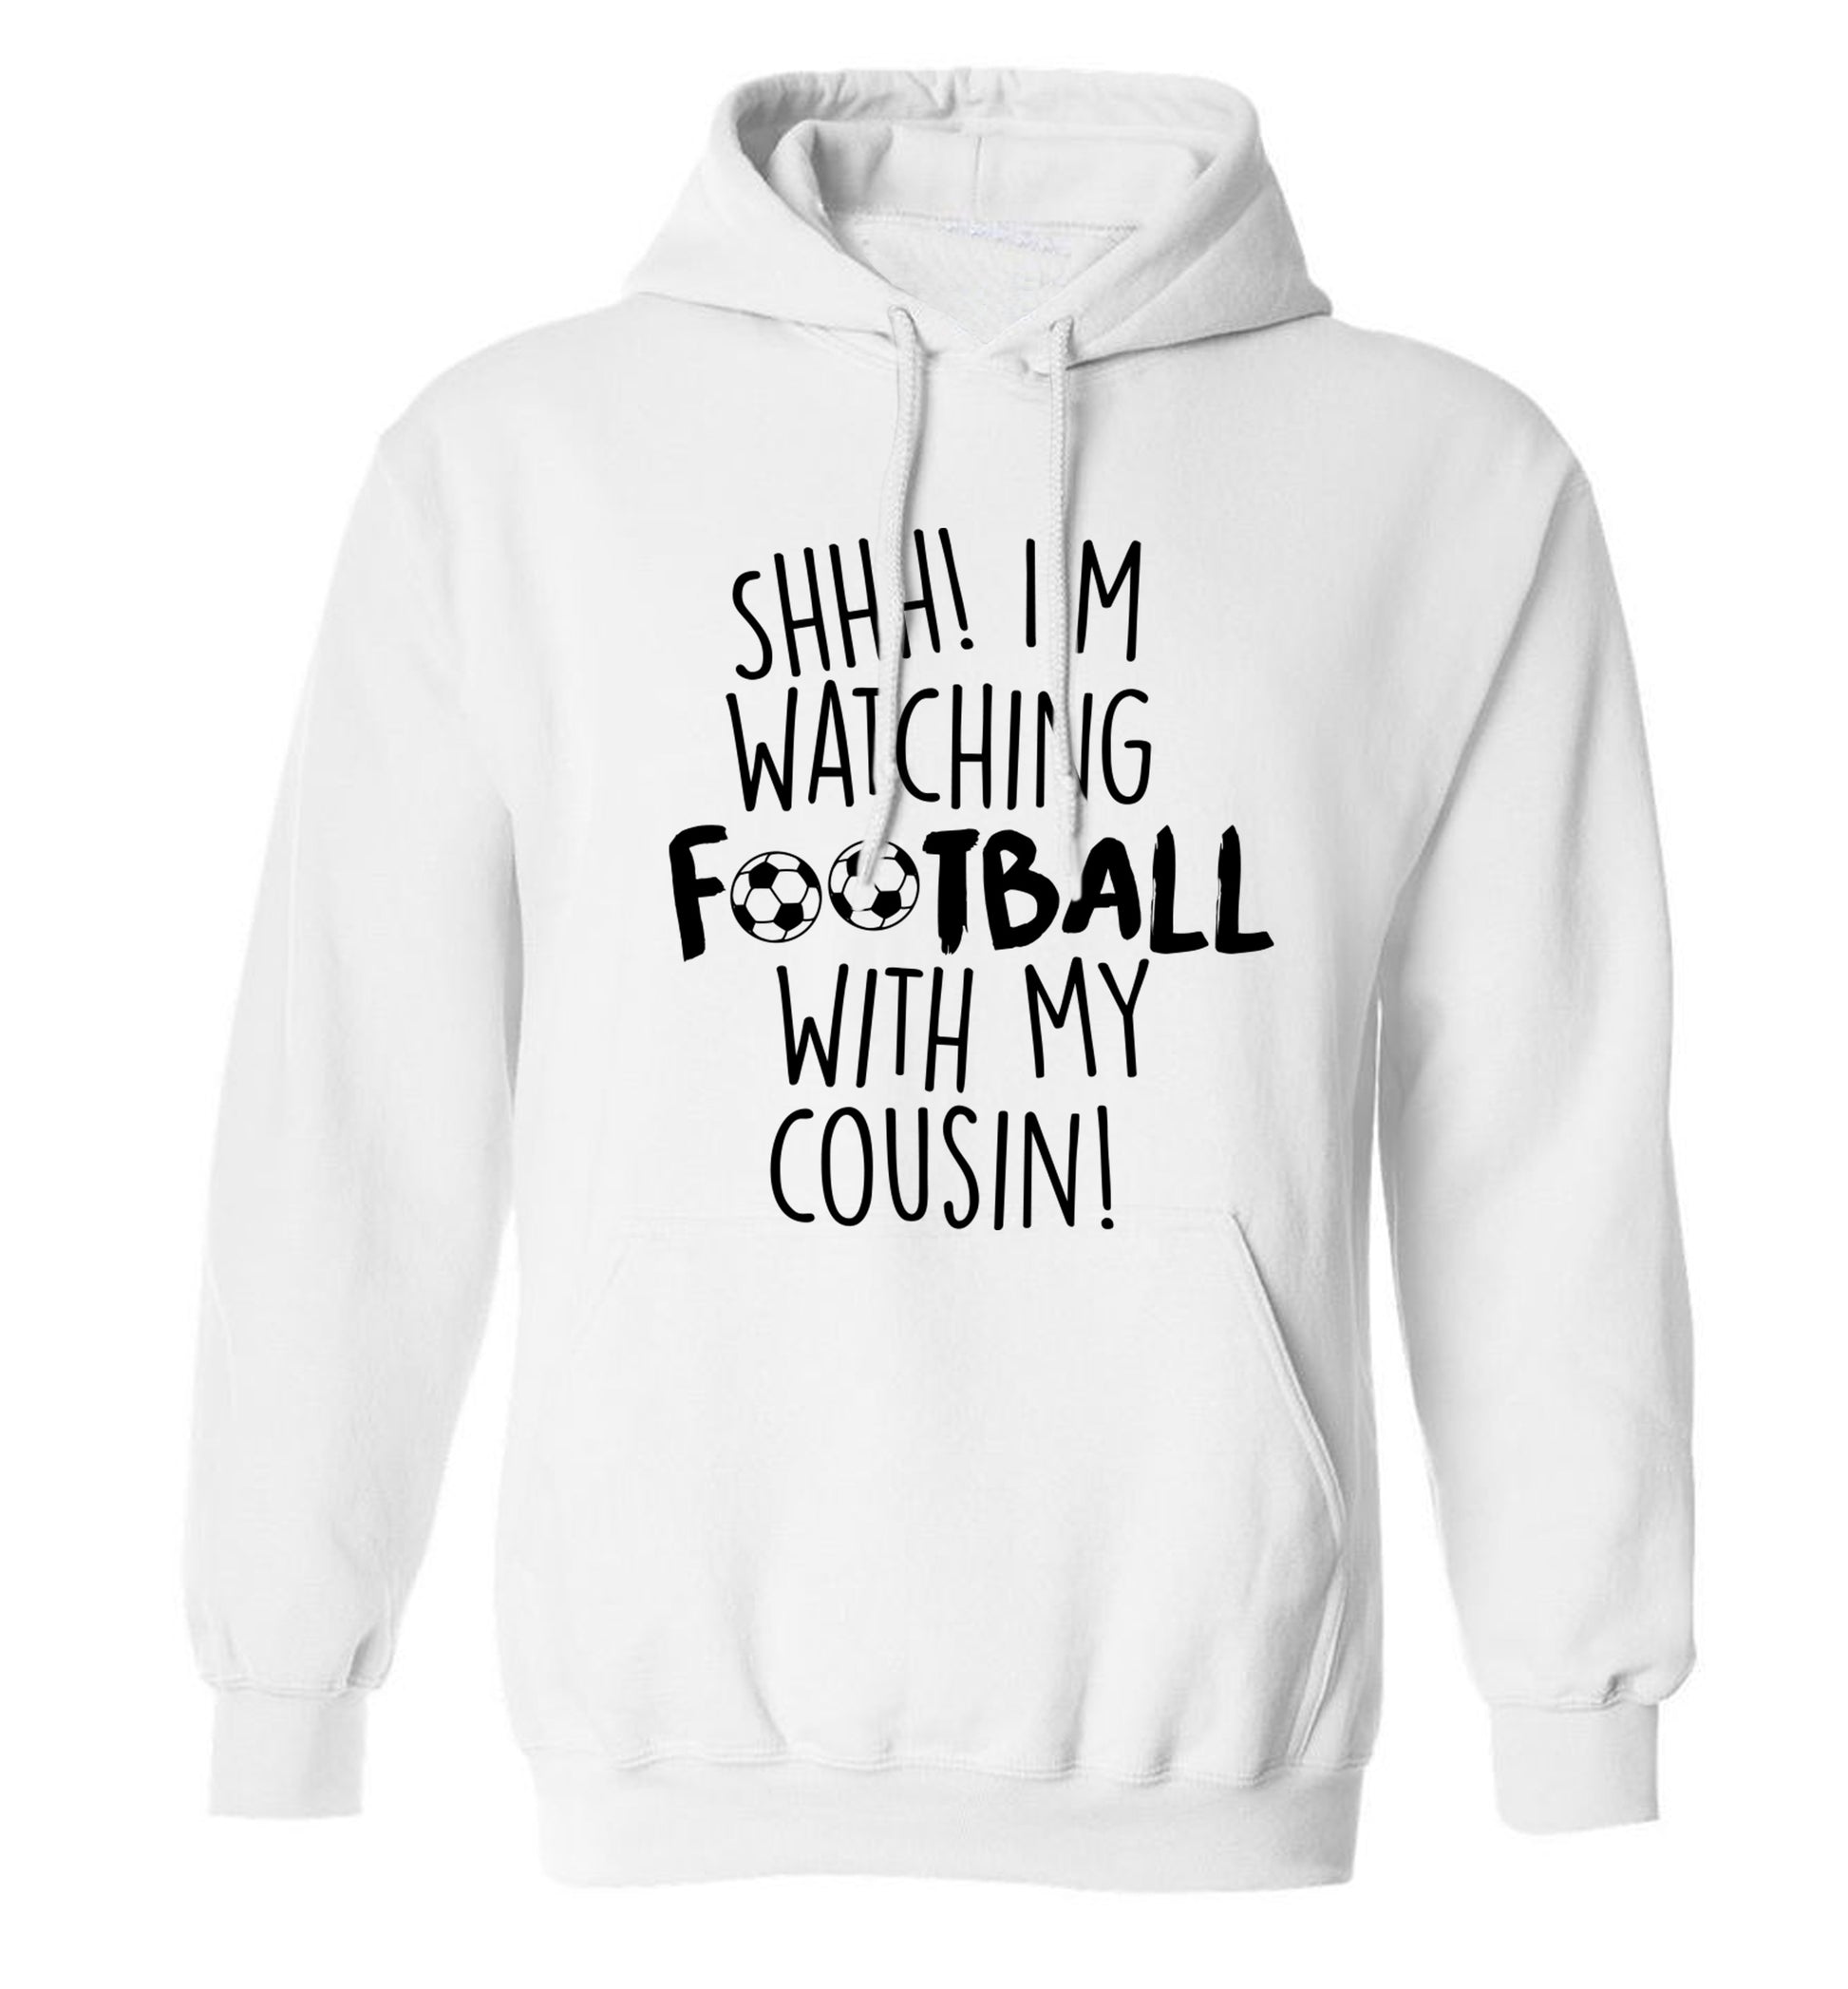 Shhh I'm watching football with my cousin adults unisexwhite hoodie 2XL